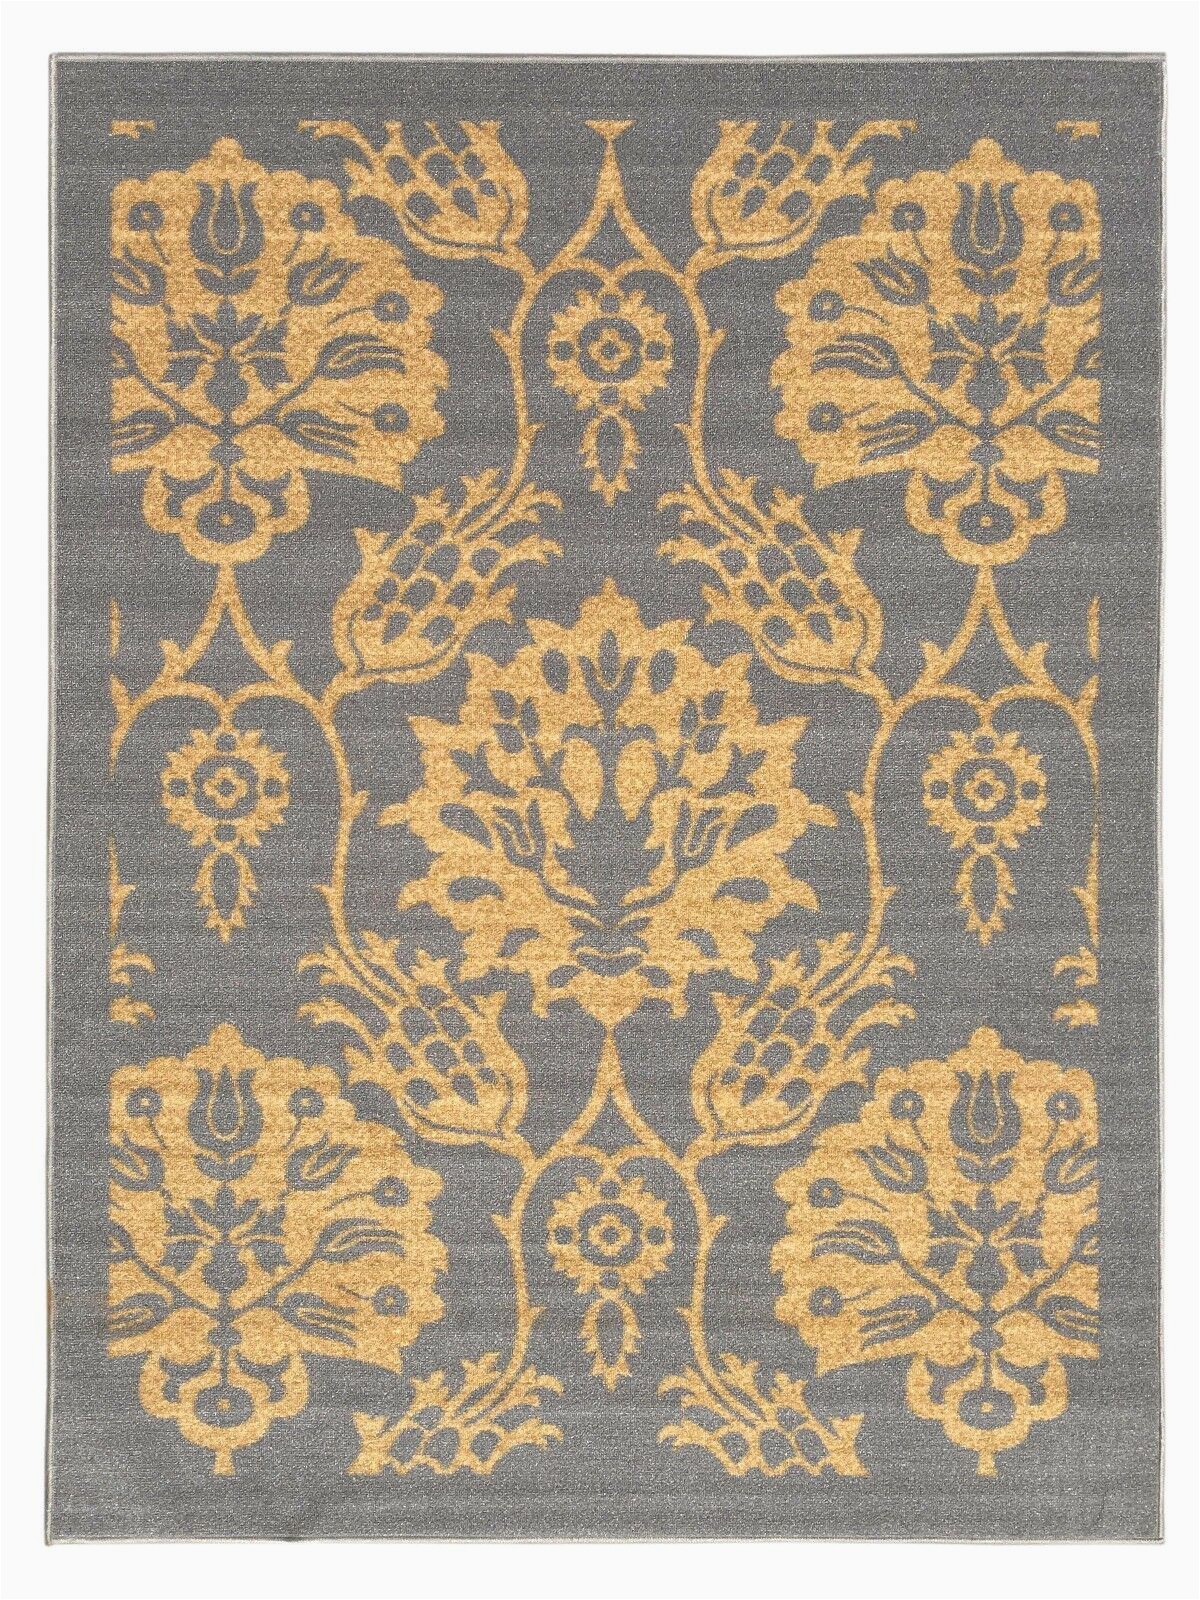 4 X 6 Rubber Backed area Rugs Rubber Backed Non Skid Non Slip Gold & Gray Color Floral Design area Rug